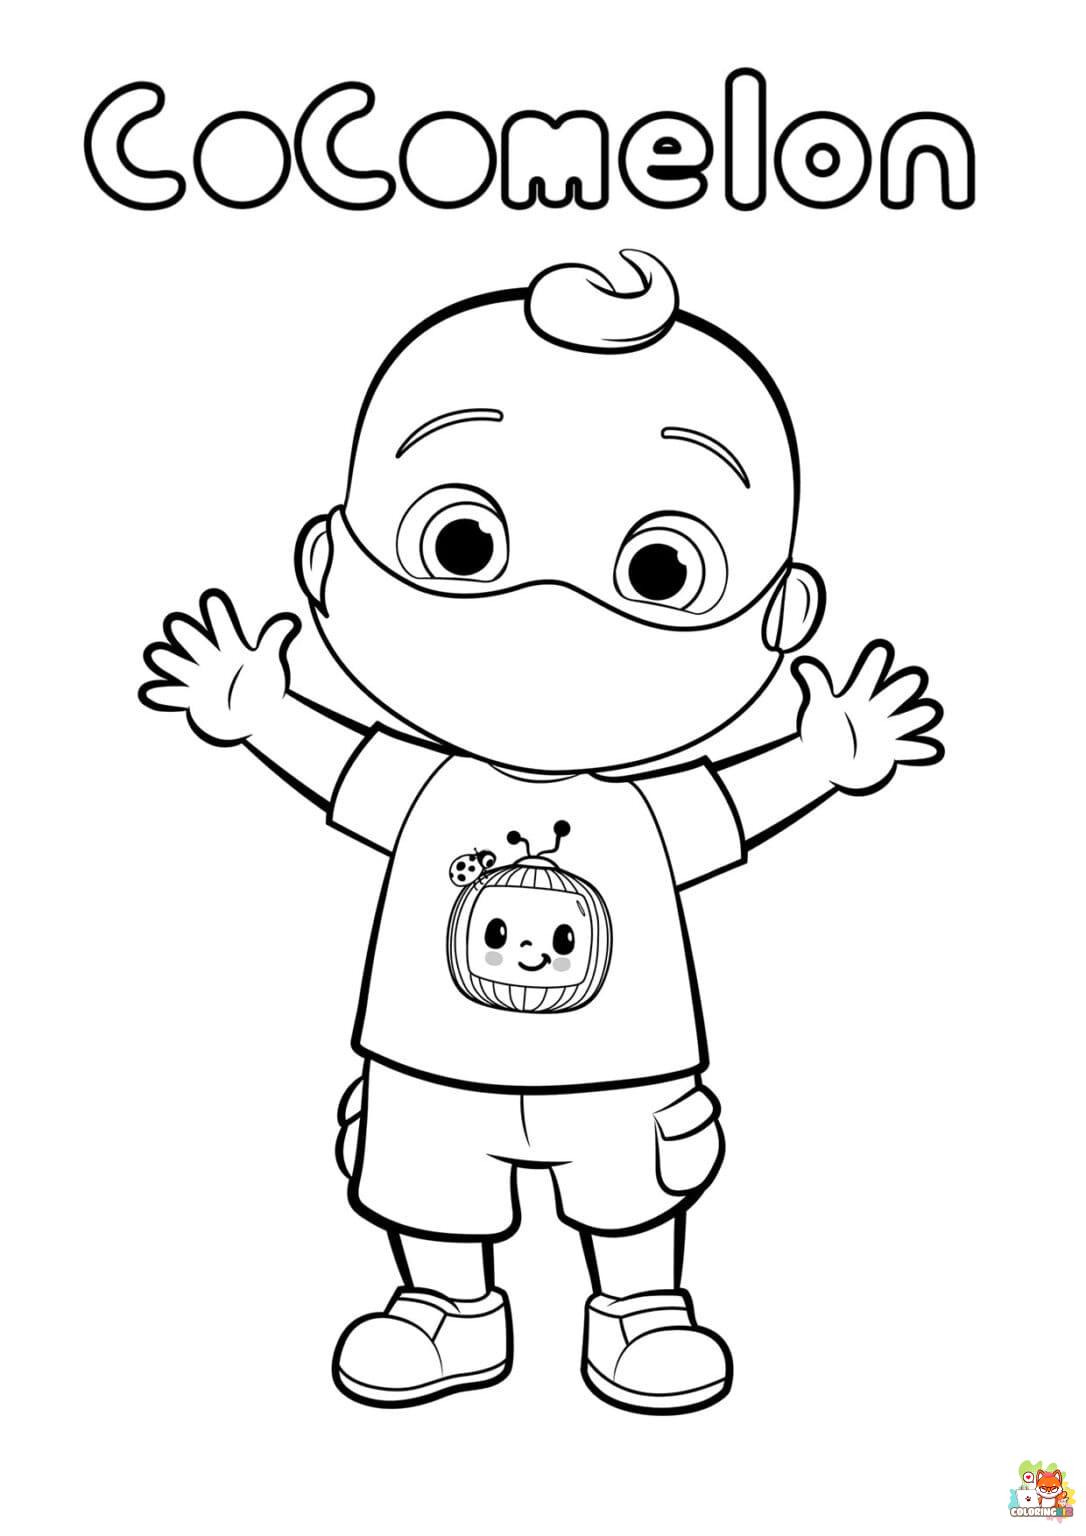 cocomelon coloring pages 1